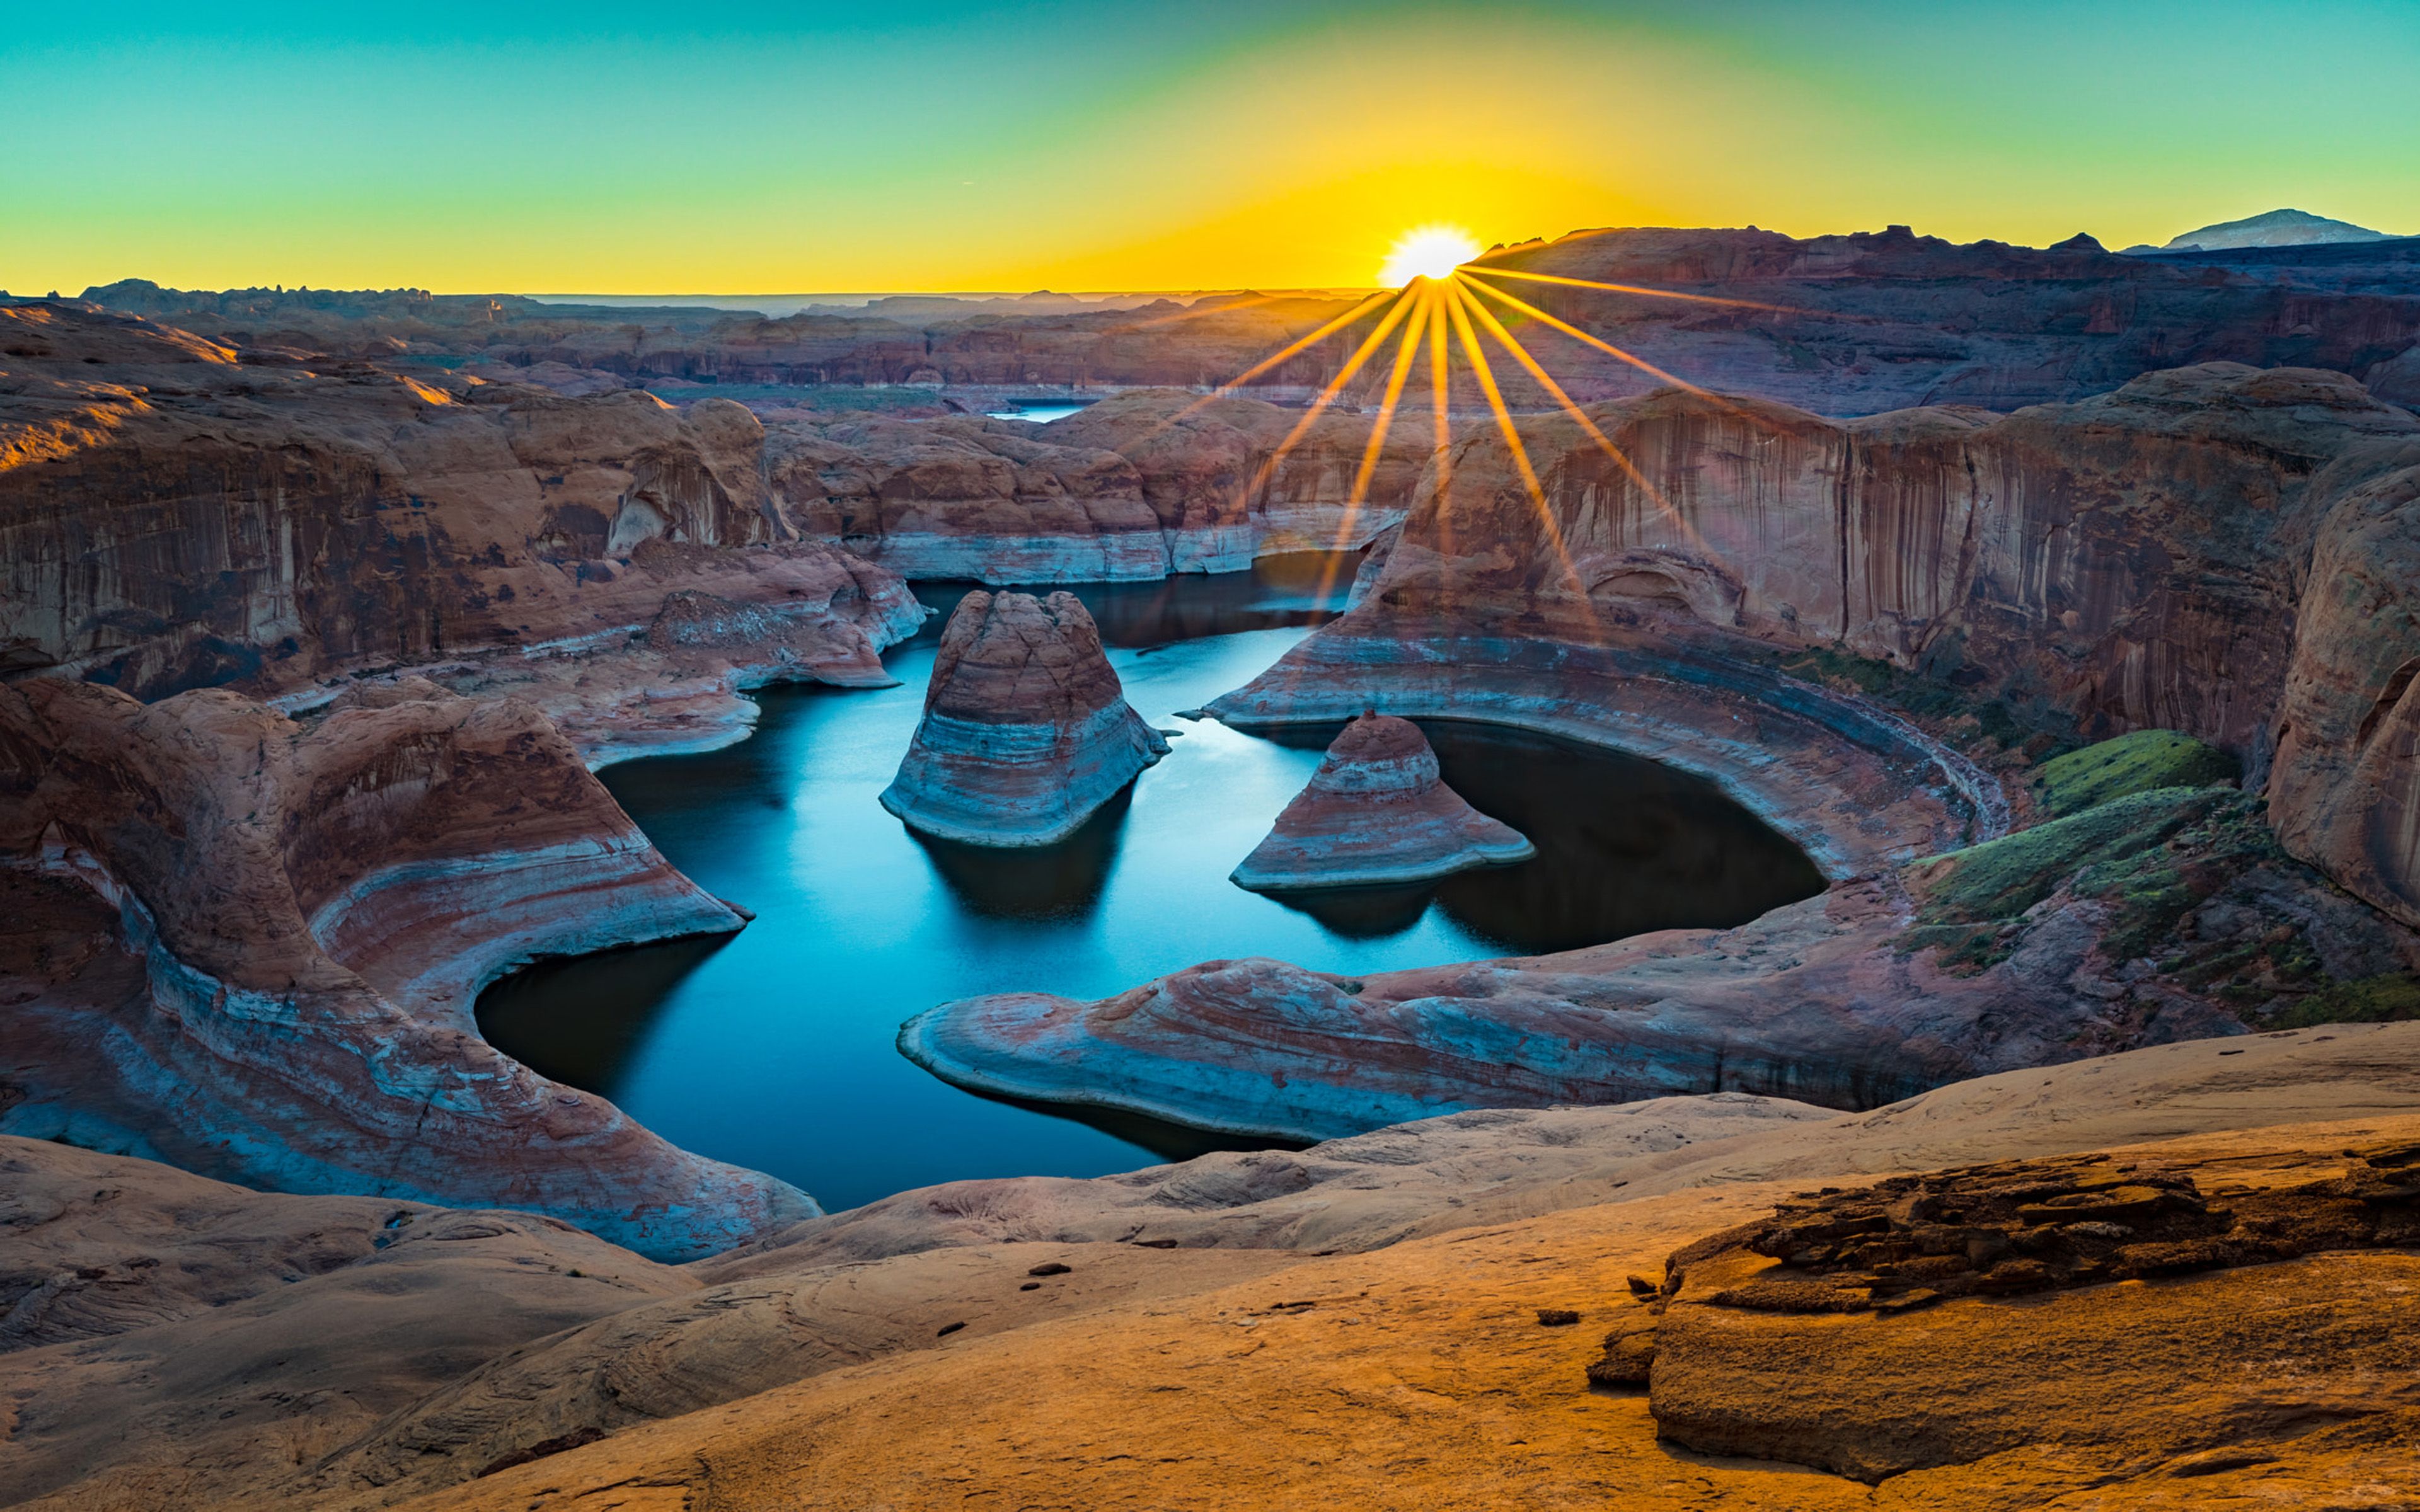 Sunrise Reflection Canyon Colorado River Lake Powell Escalante Utah United States Android Wallpapers For Your Desktop Or Phone : Wallpapers13